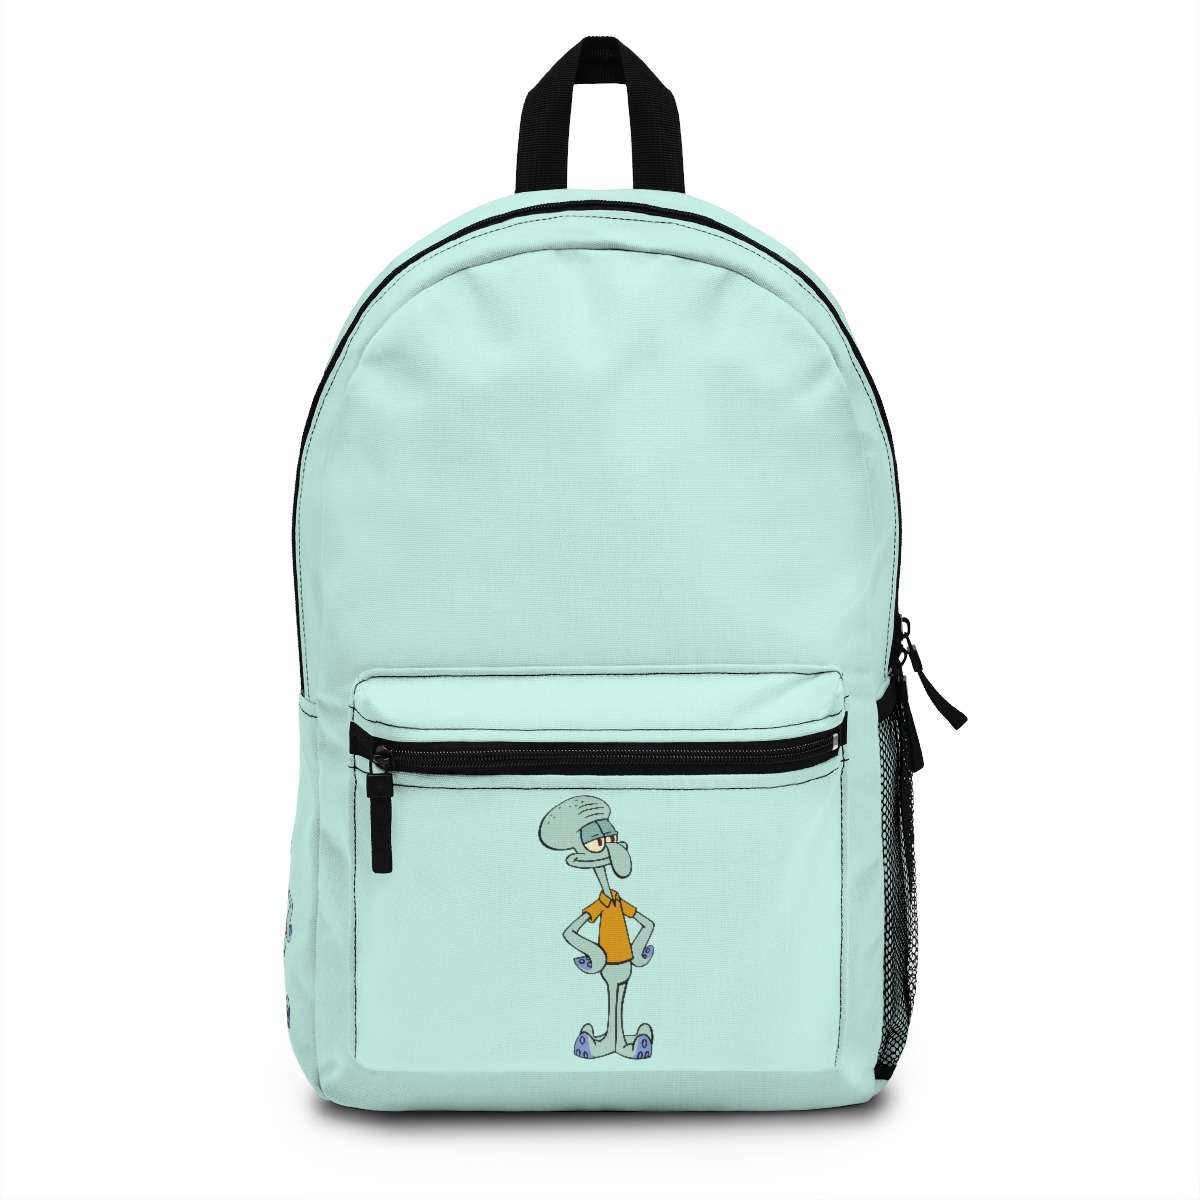 Squidward Tentacles Backpack - Squidward Tentacles bookbag - Squidward Tentacles merch - Squidward Tentacles apparel